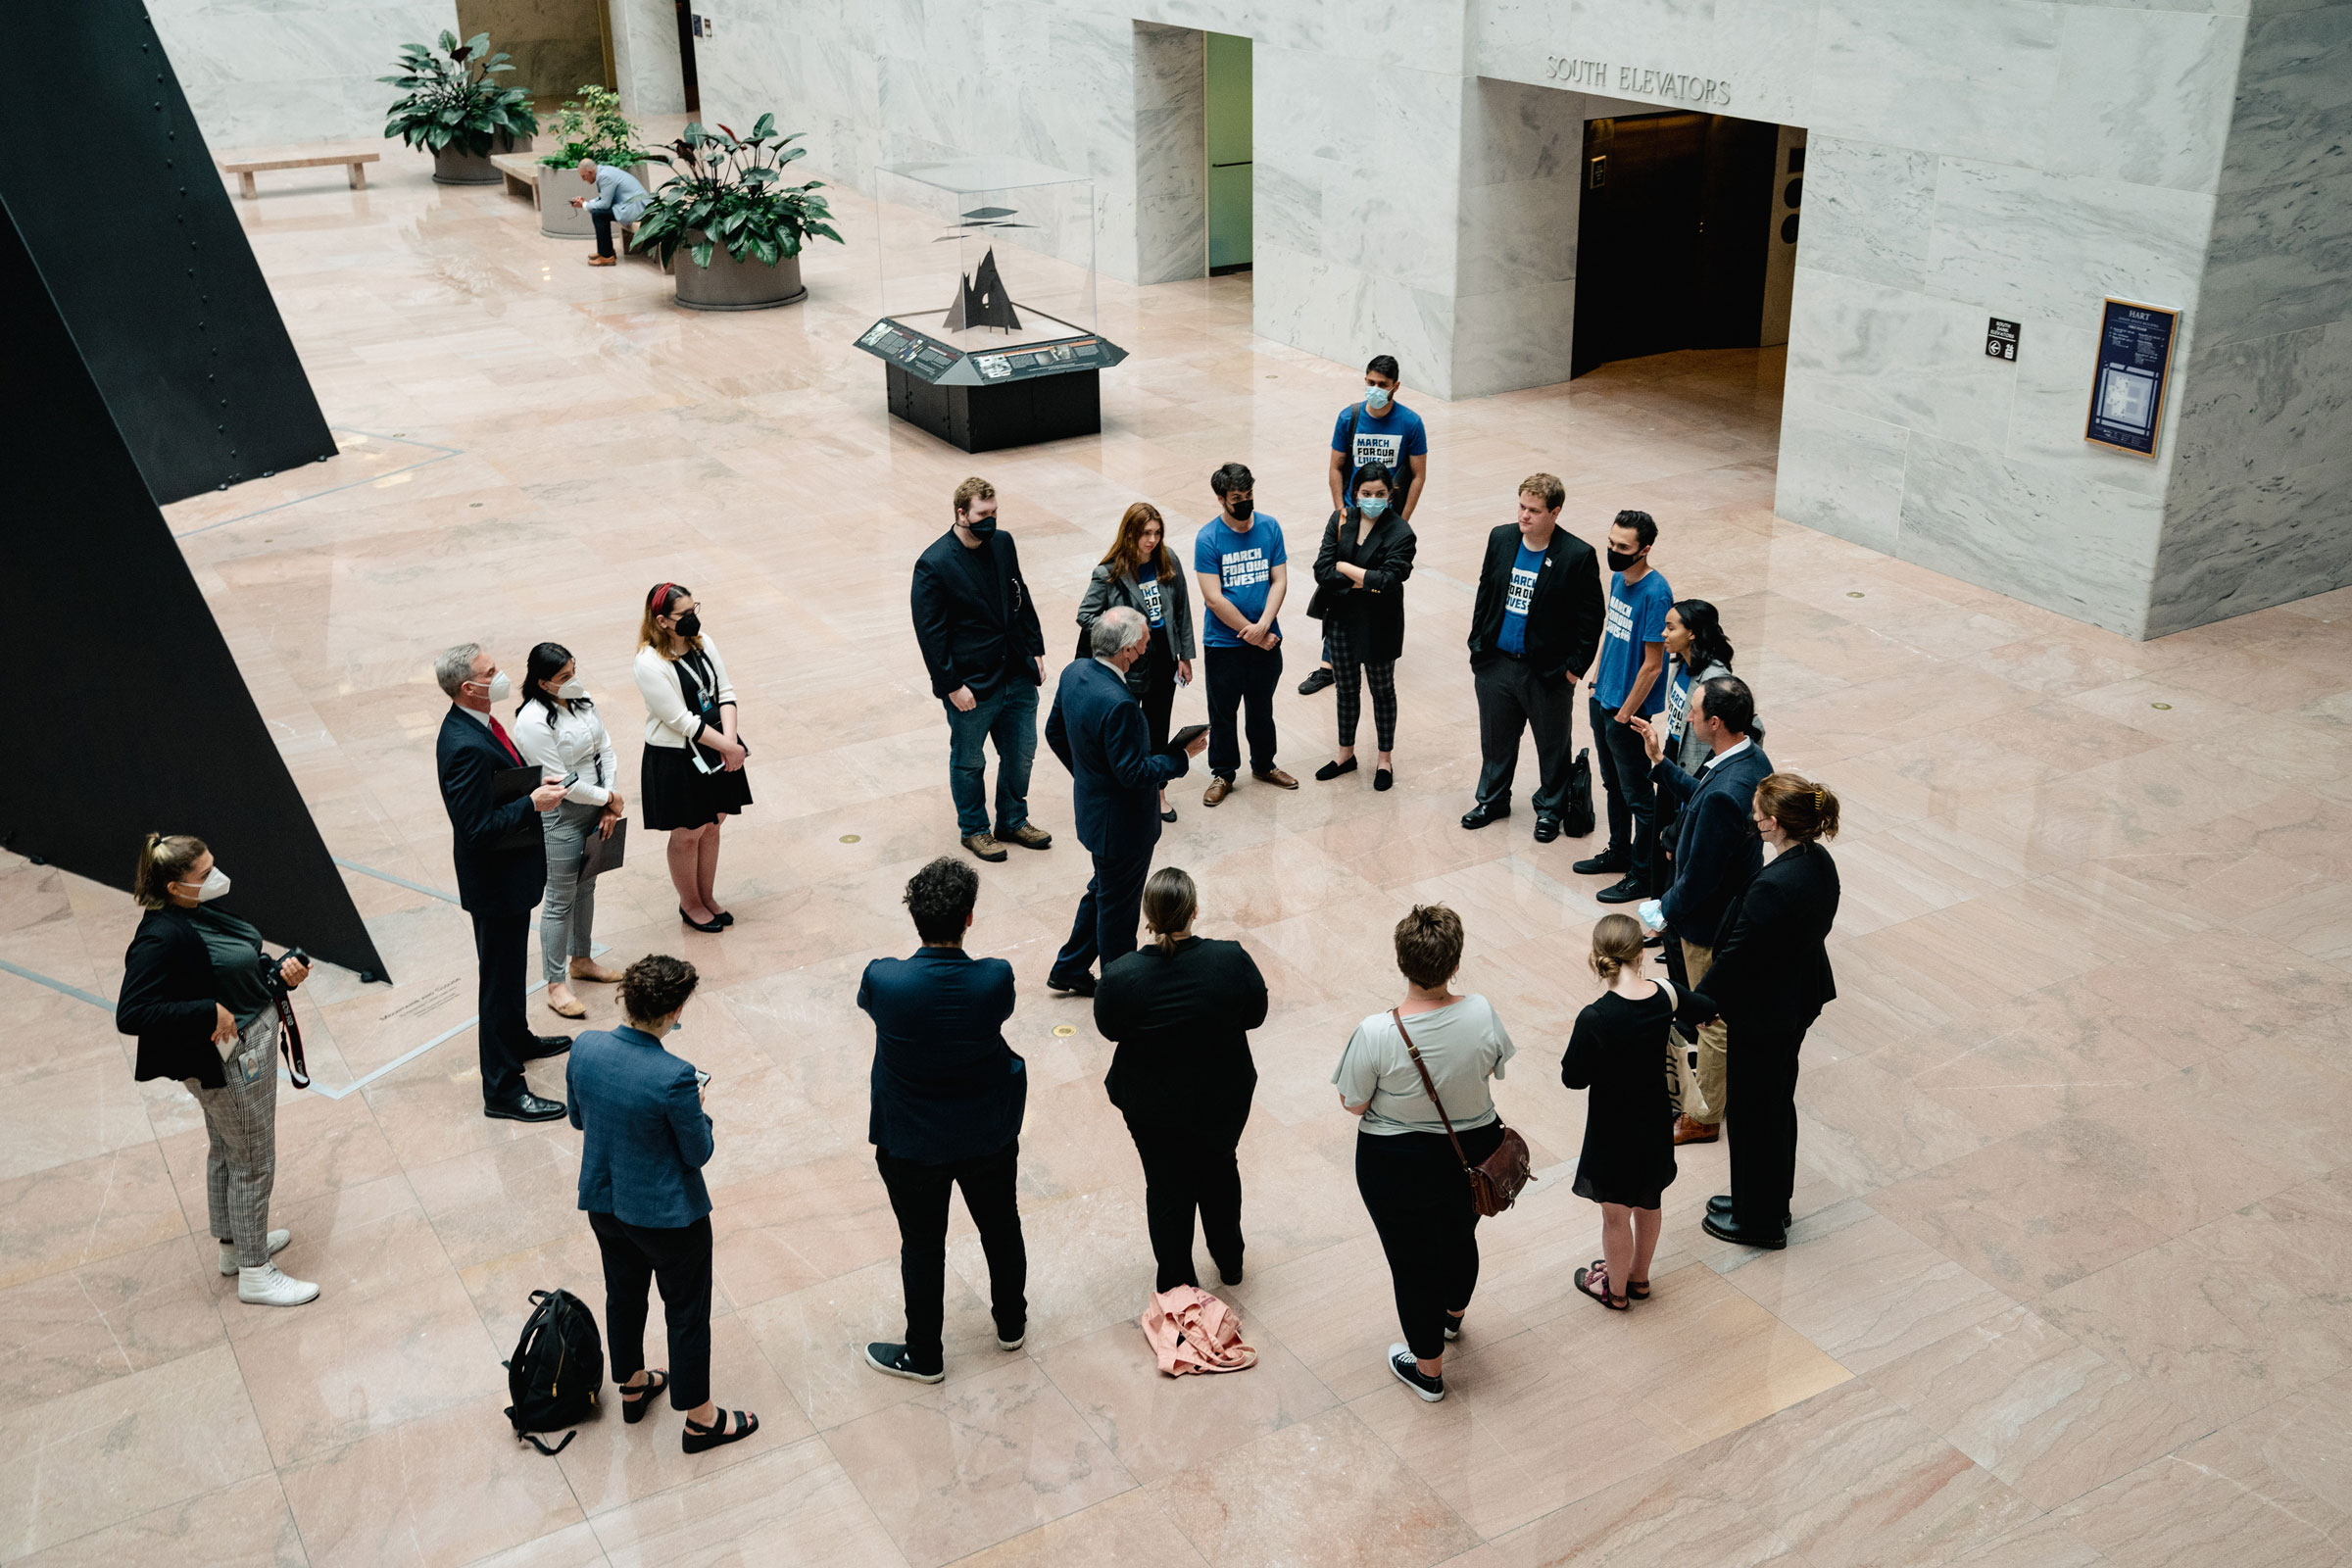 David Hogg and his fellow activists meet with Senator Ed Markey (D-MA) at the Hart Senate Office Building in Washington, D.C., on Tuesday, June 9, 2022. (Shuran Huang for TIME)